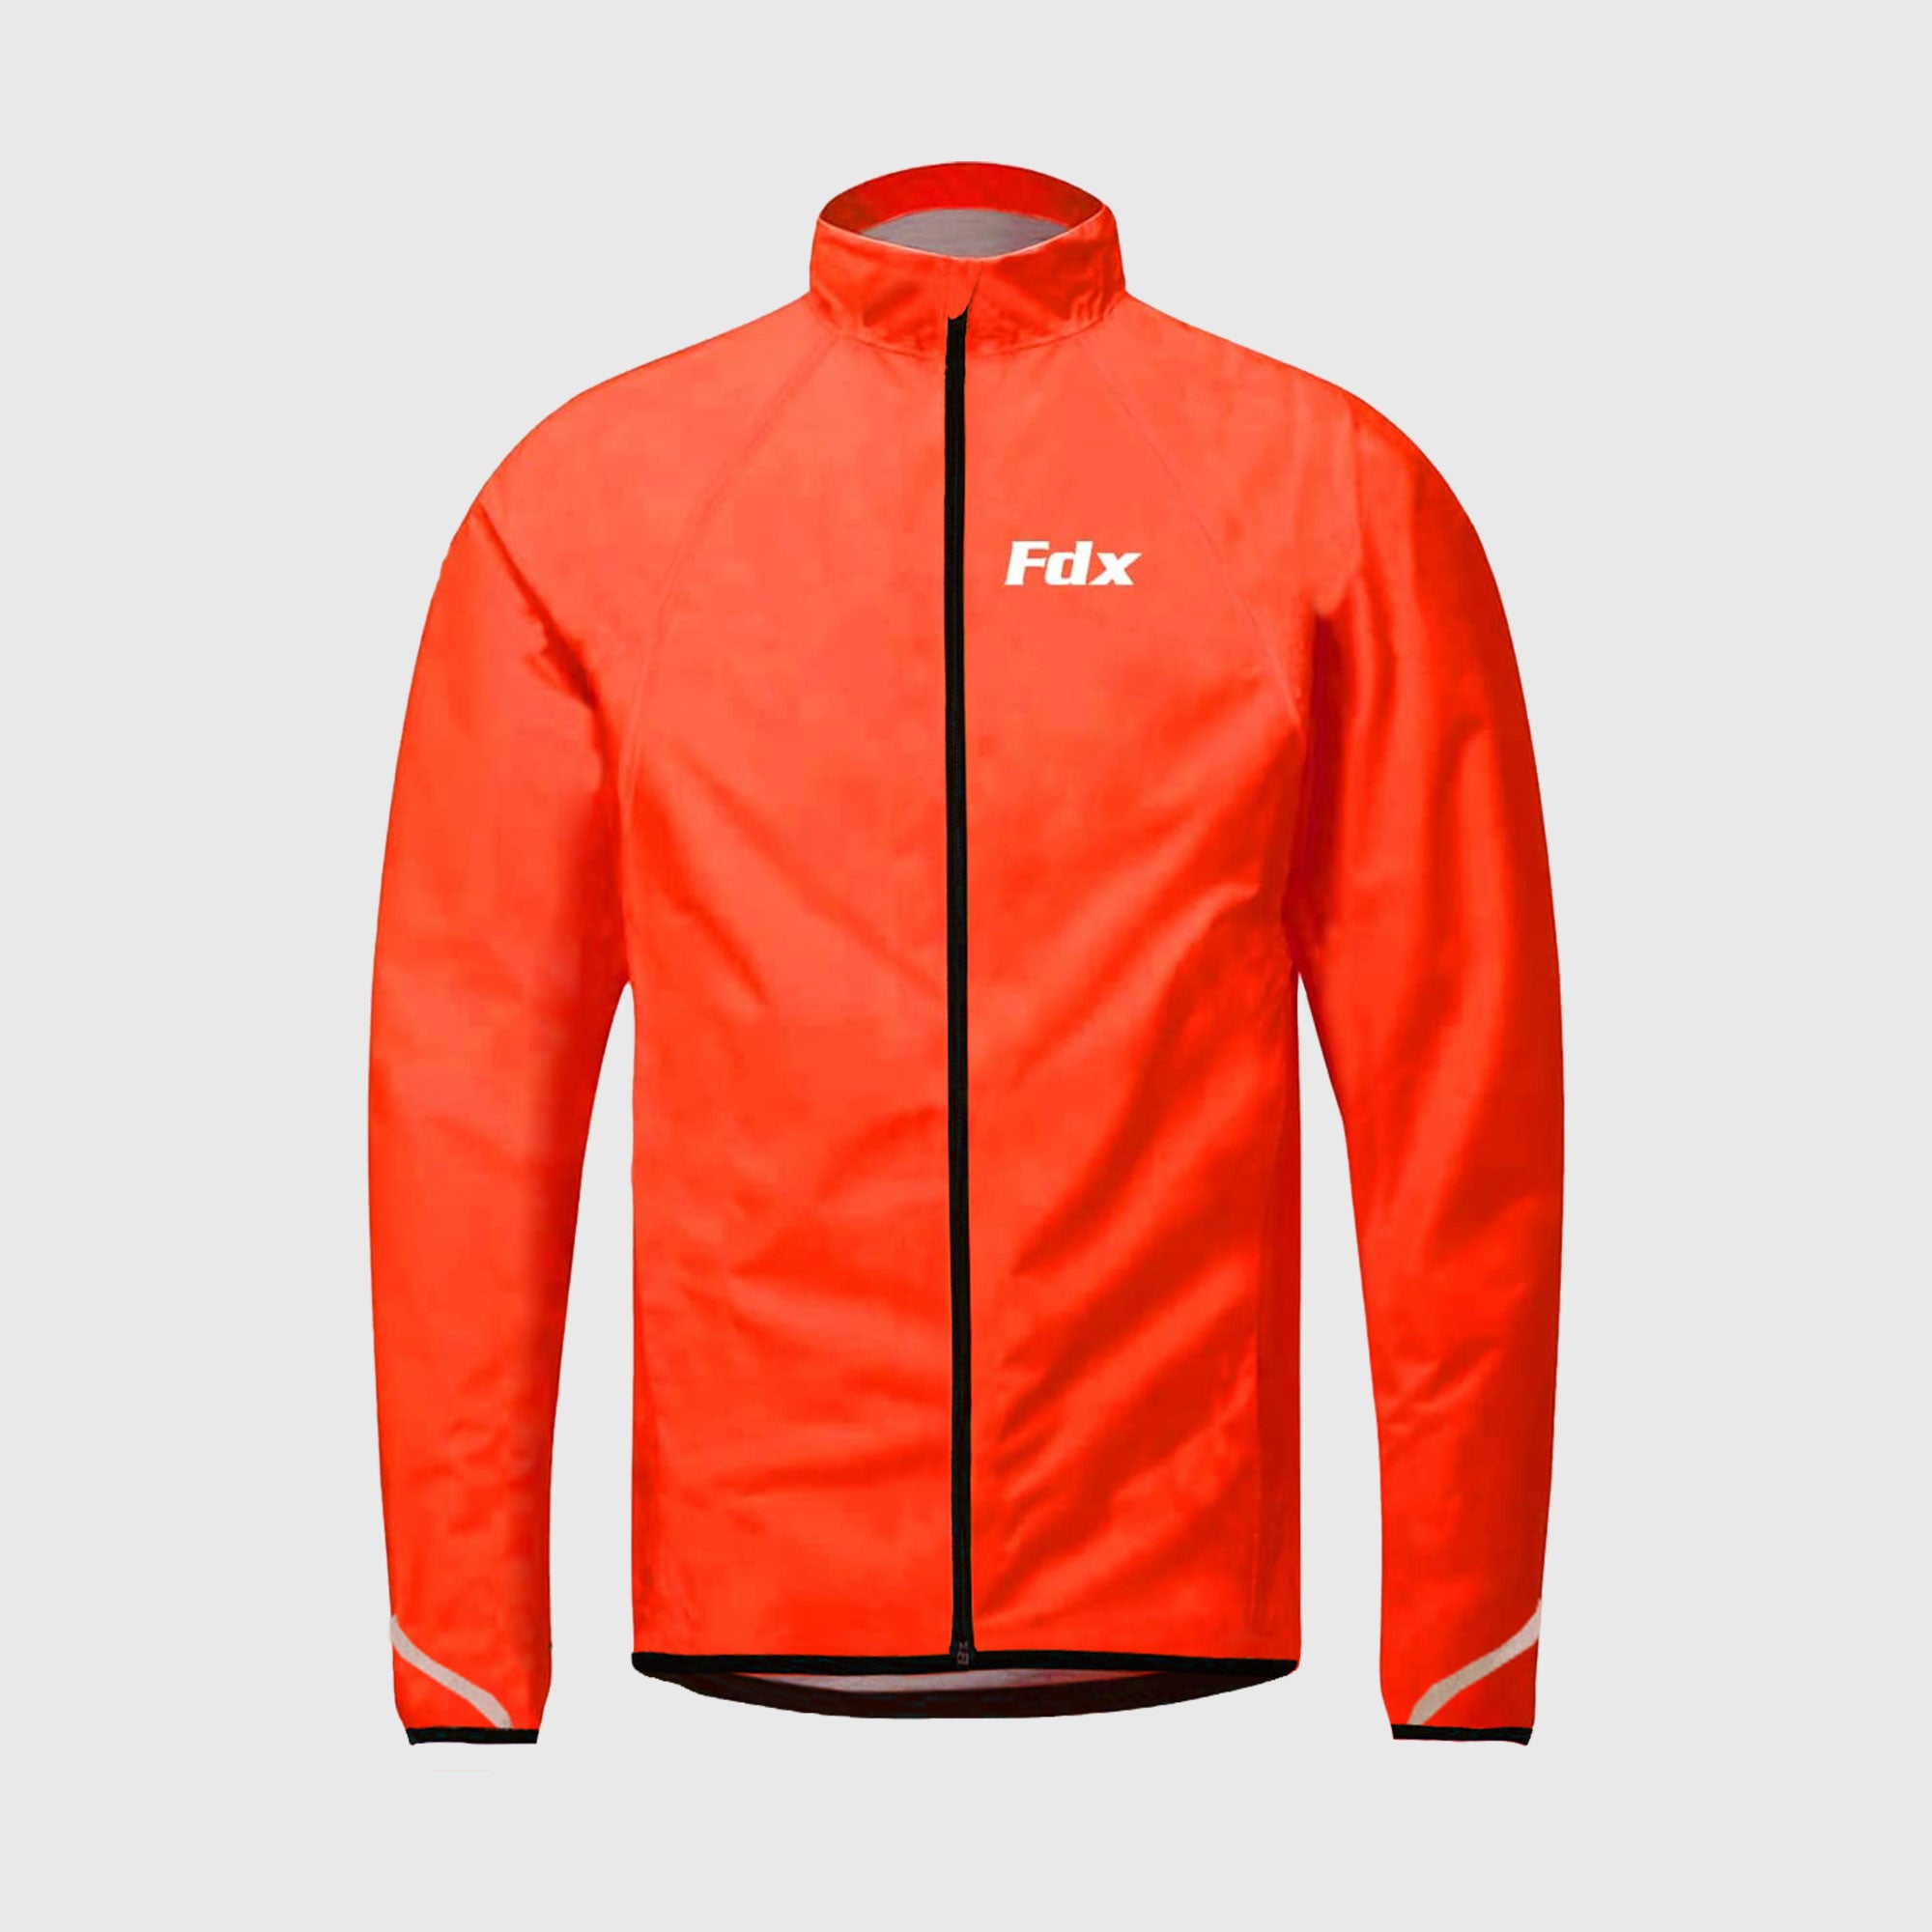 Women’s Orange cycling jacket waterproof breathable quick dry MTB rain top, lightweight packable reflective rain jacket for riding running racing